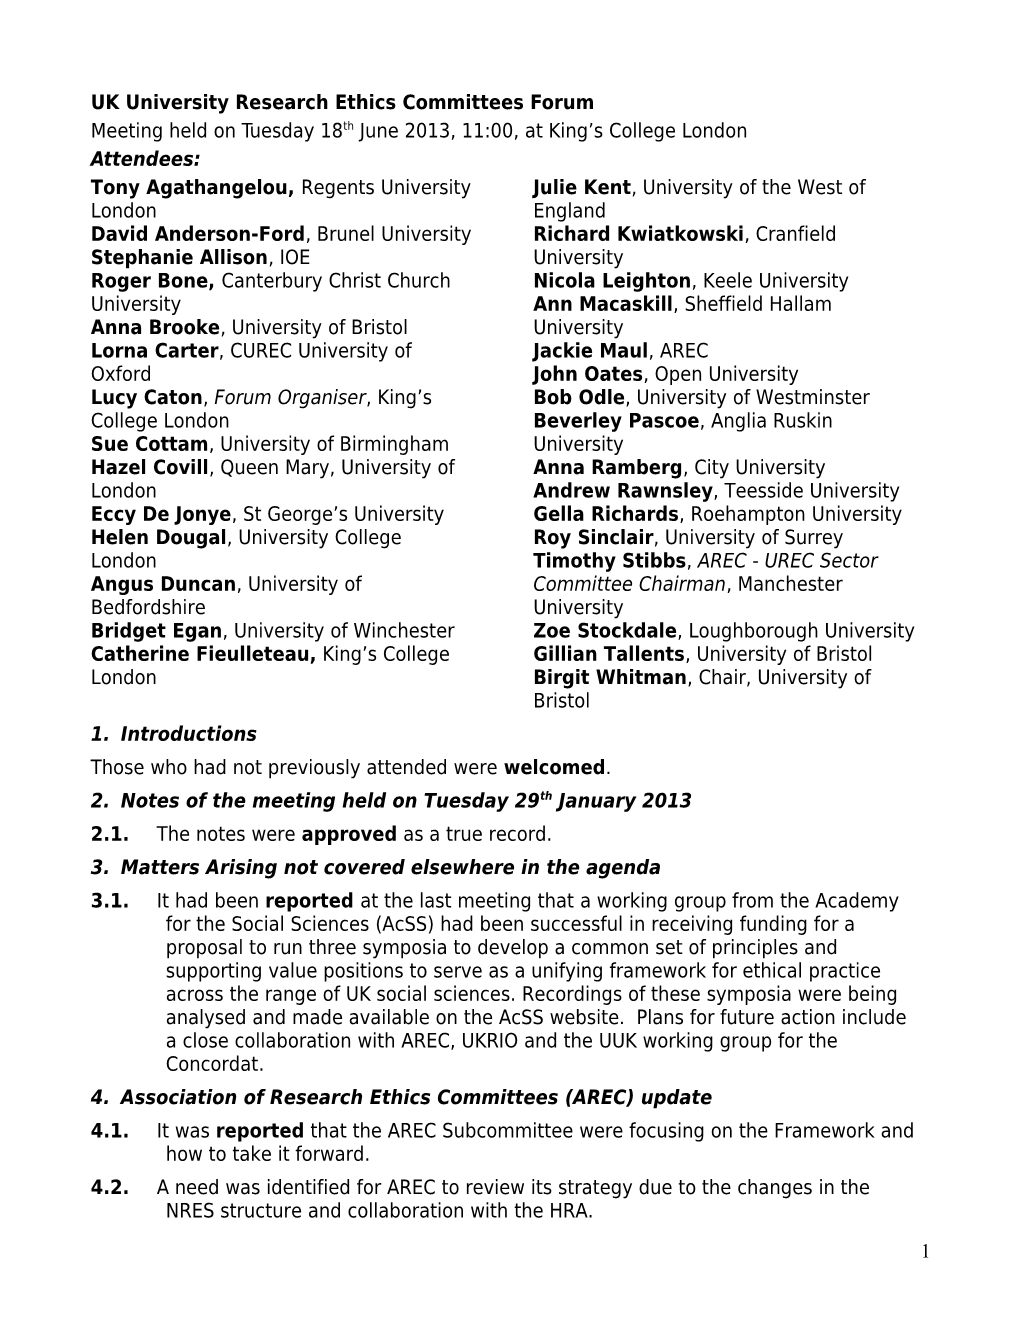 University Research Ethics Committees Working Group s1